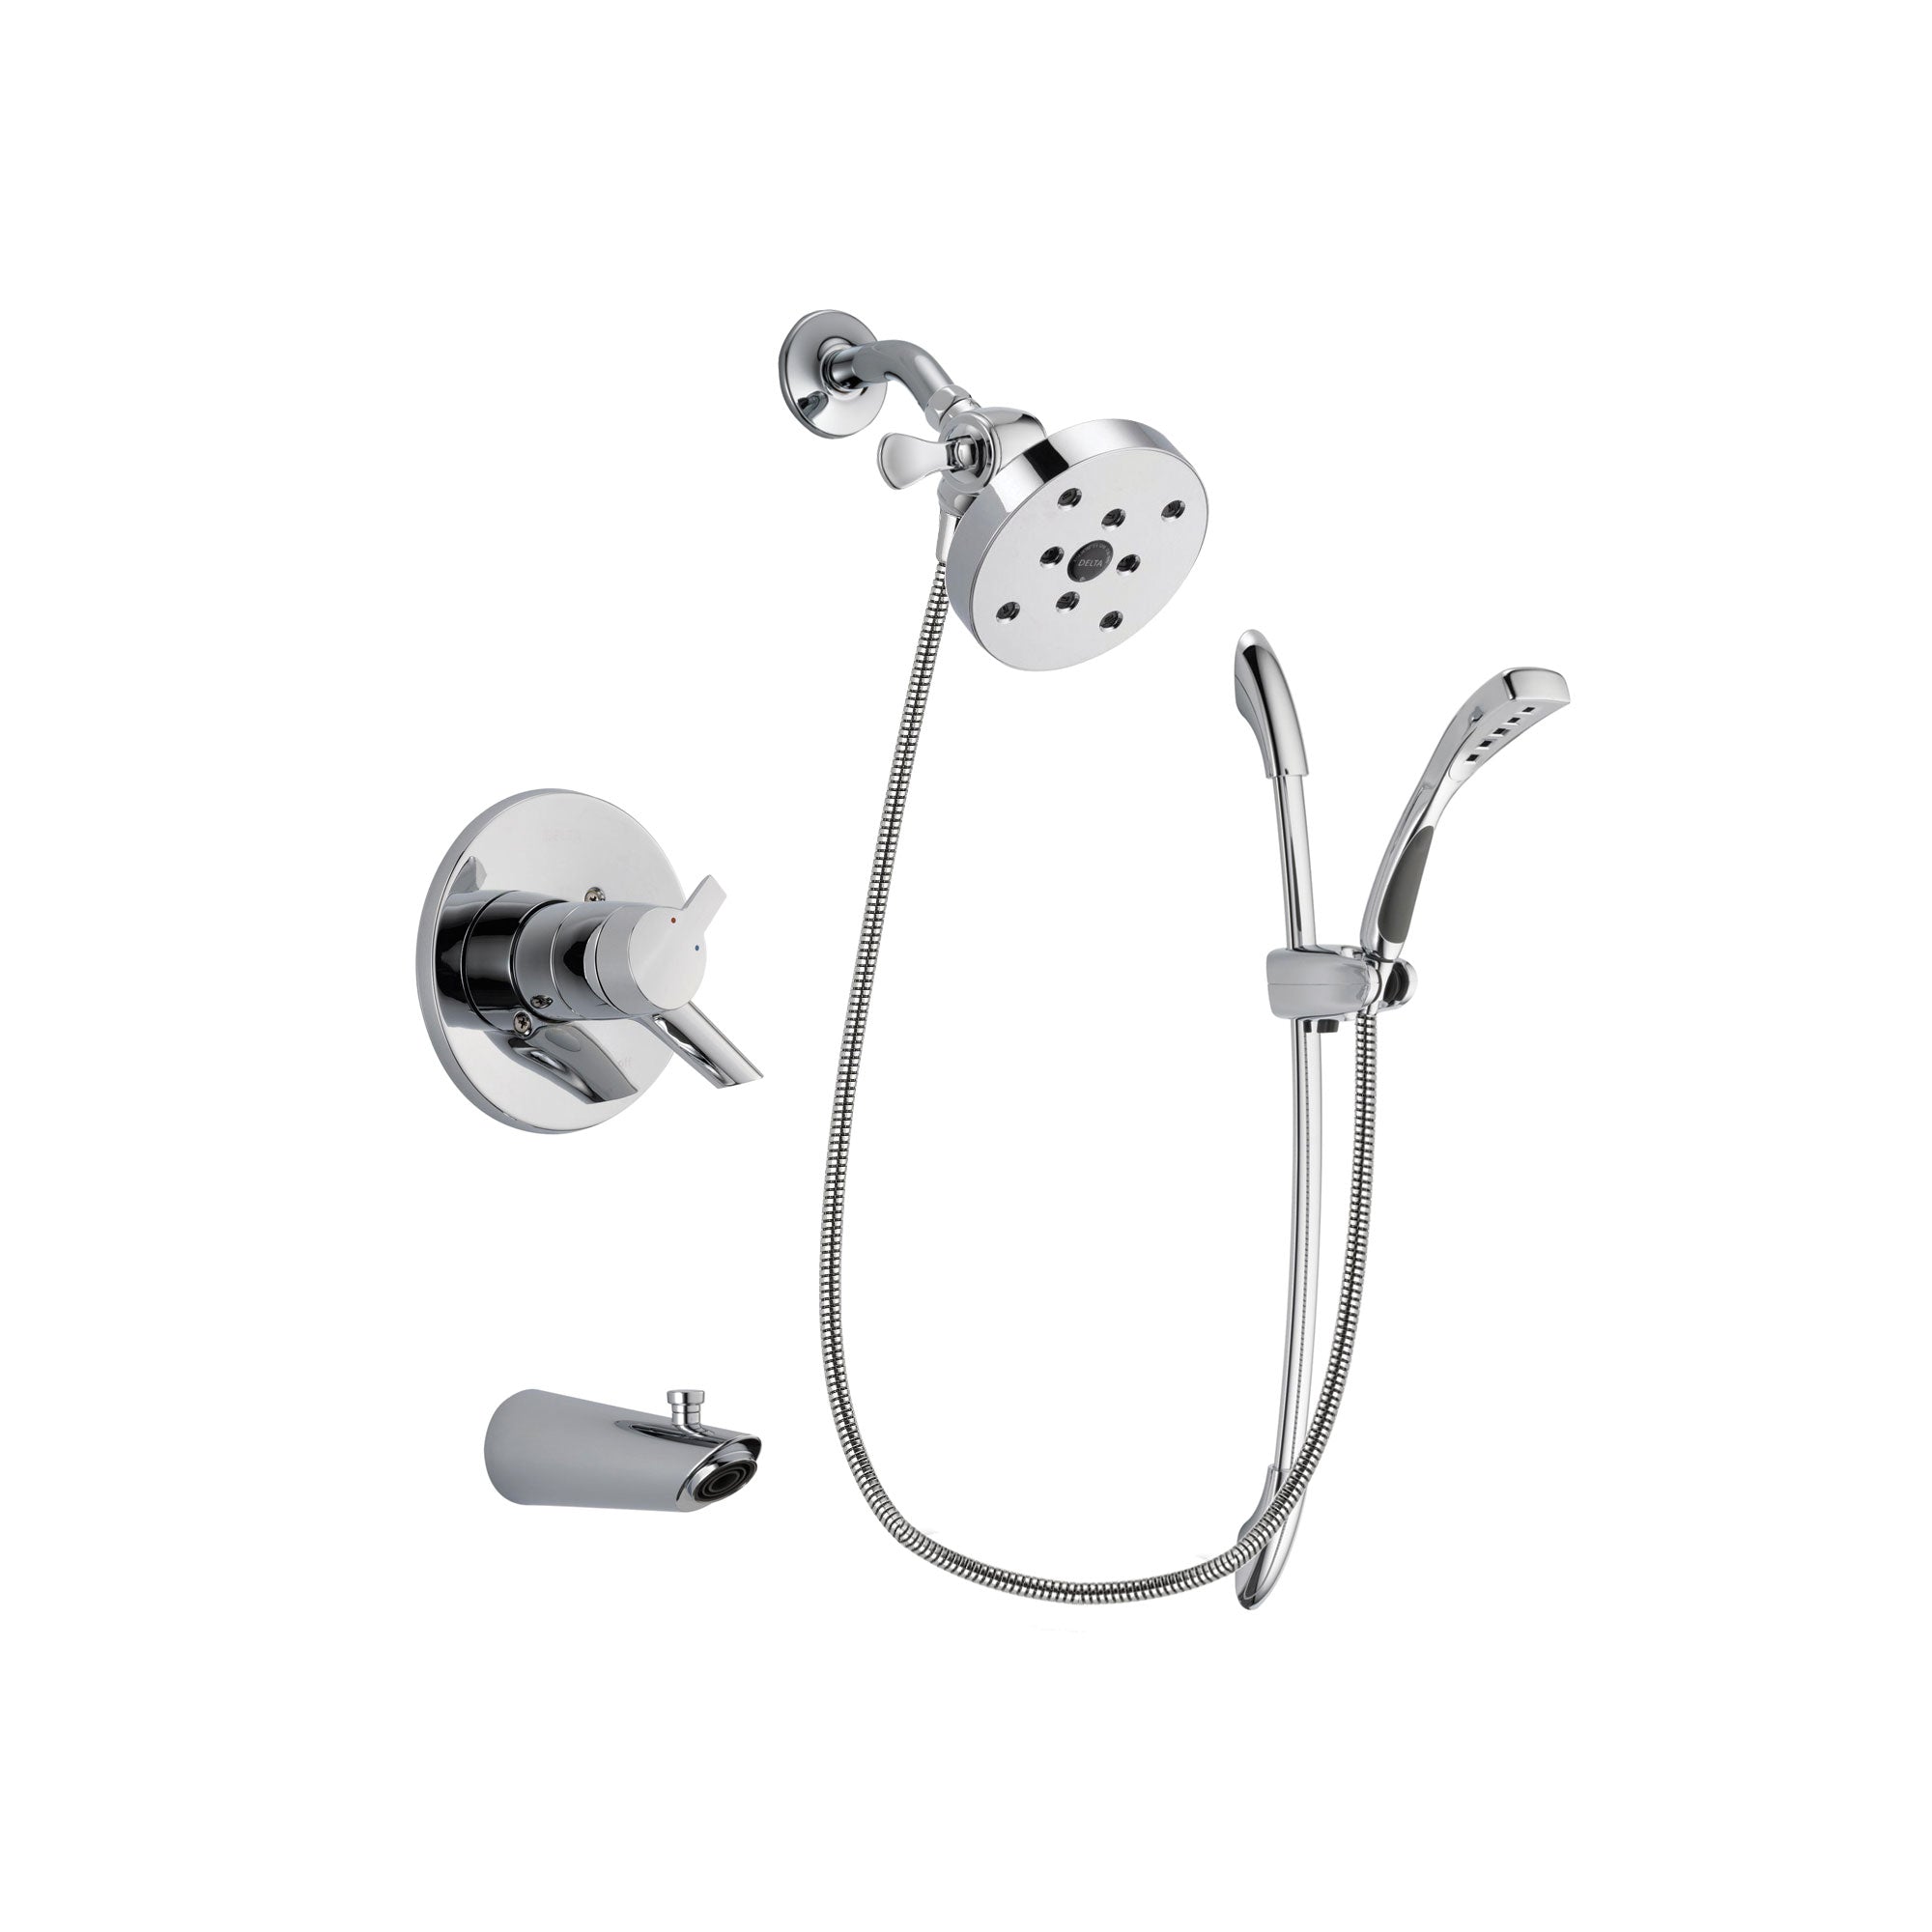 Delta Compel Chrome Finish Dual Control Tub and Shower Faucet System Package with 5-1/2 inch Shower Head and Handheld Shower with Slide Bar Includes Rough-in Valve and Tub Spout DSP0551V